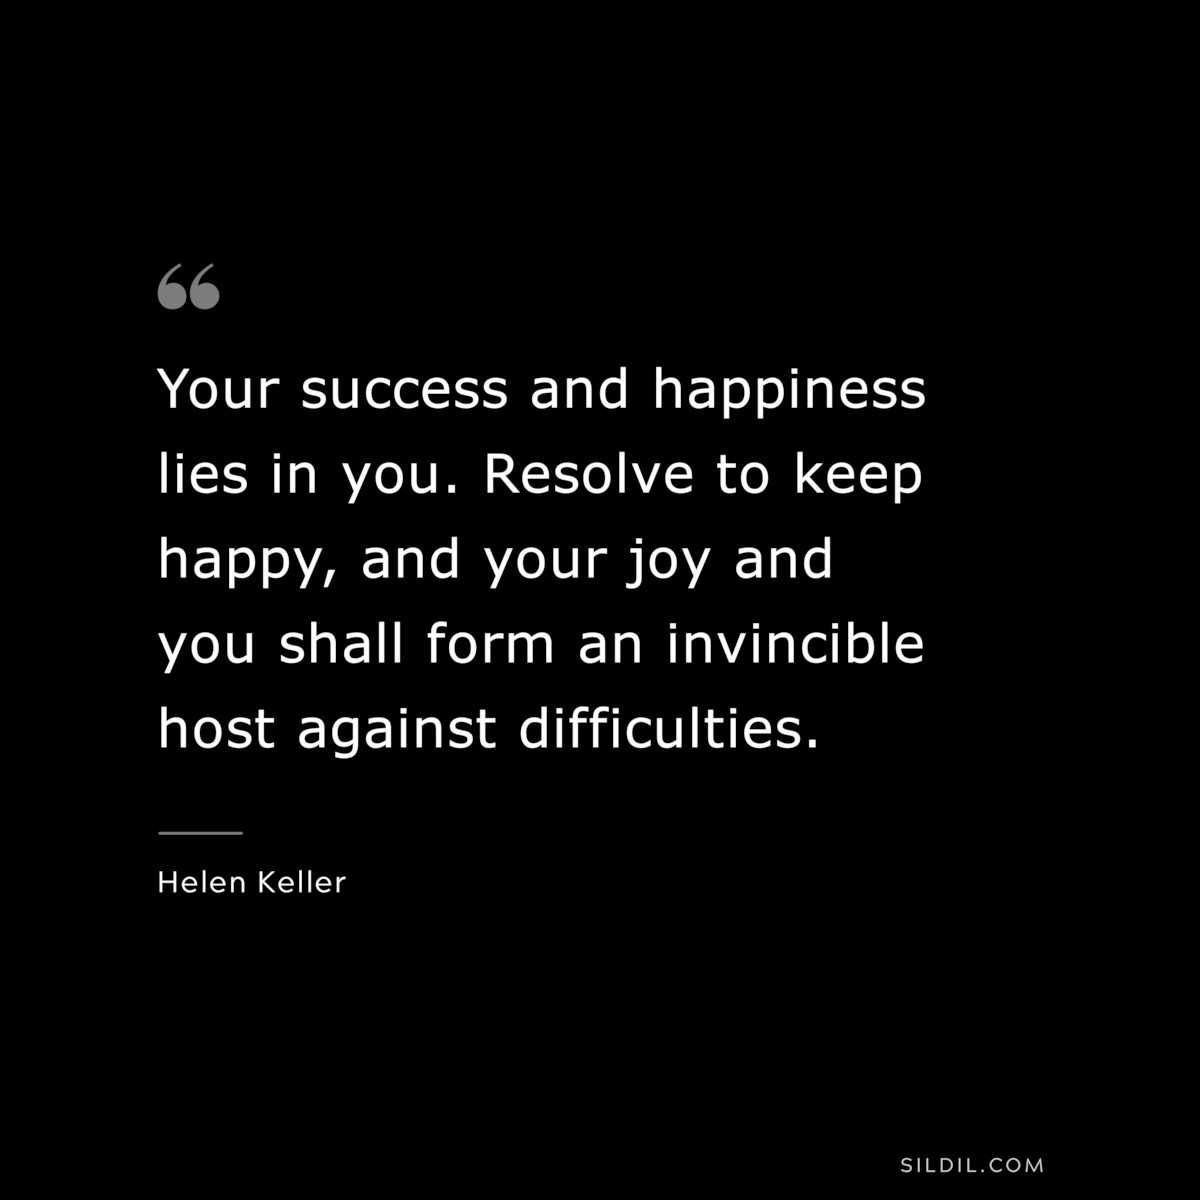 Your success and happiness lies in you. Resolve to keep happy, and your joy and you shall form an invincible host against difficulties. ― Helen Keller